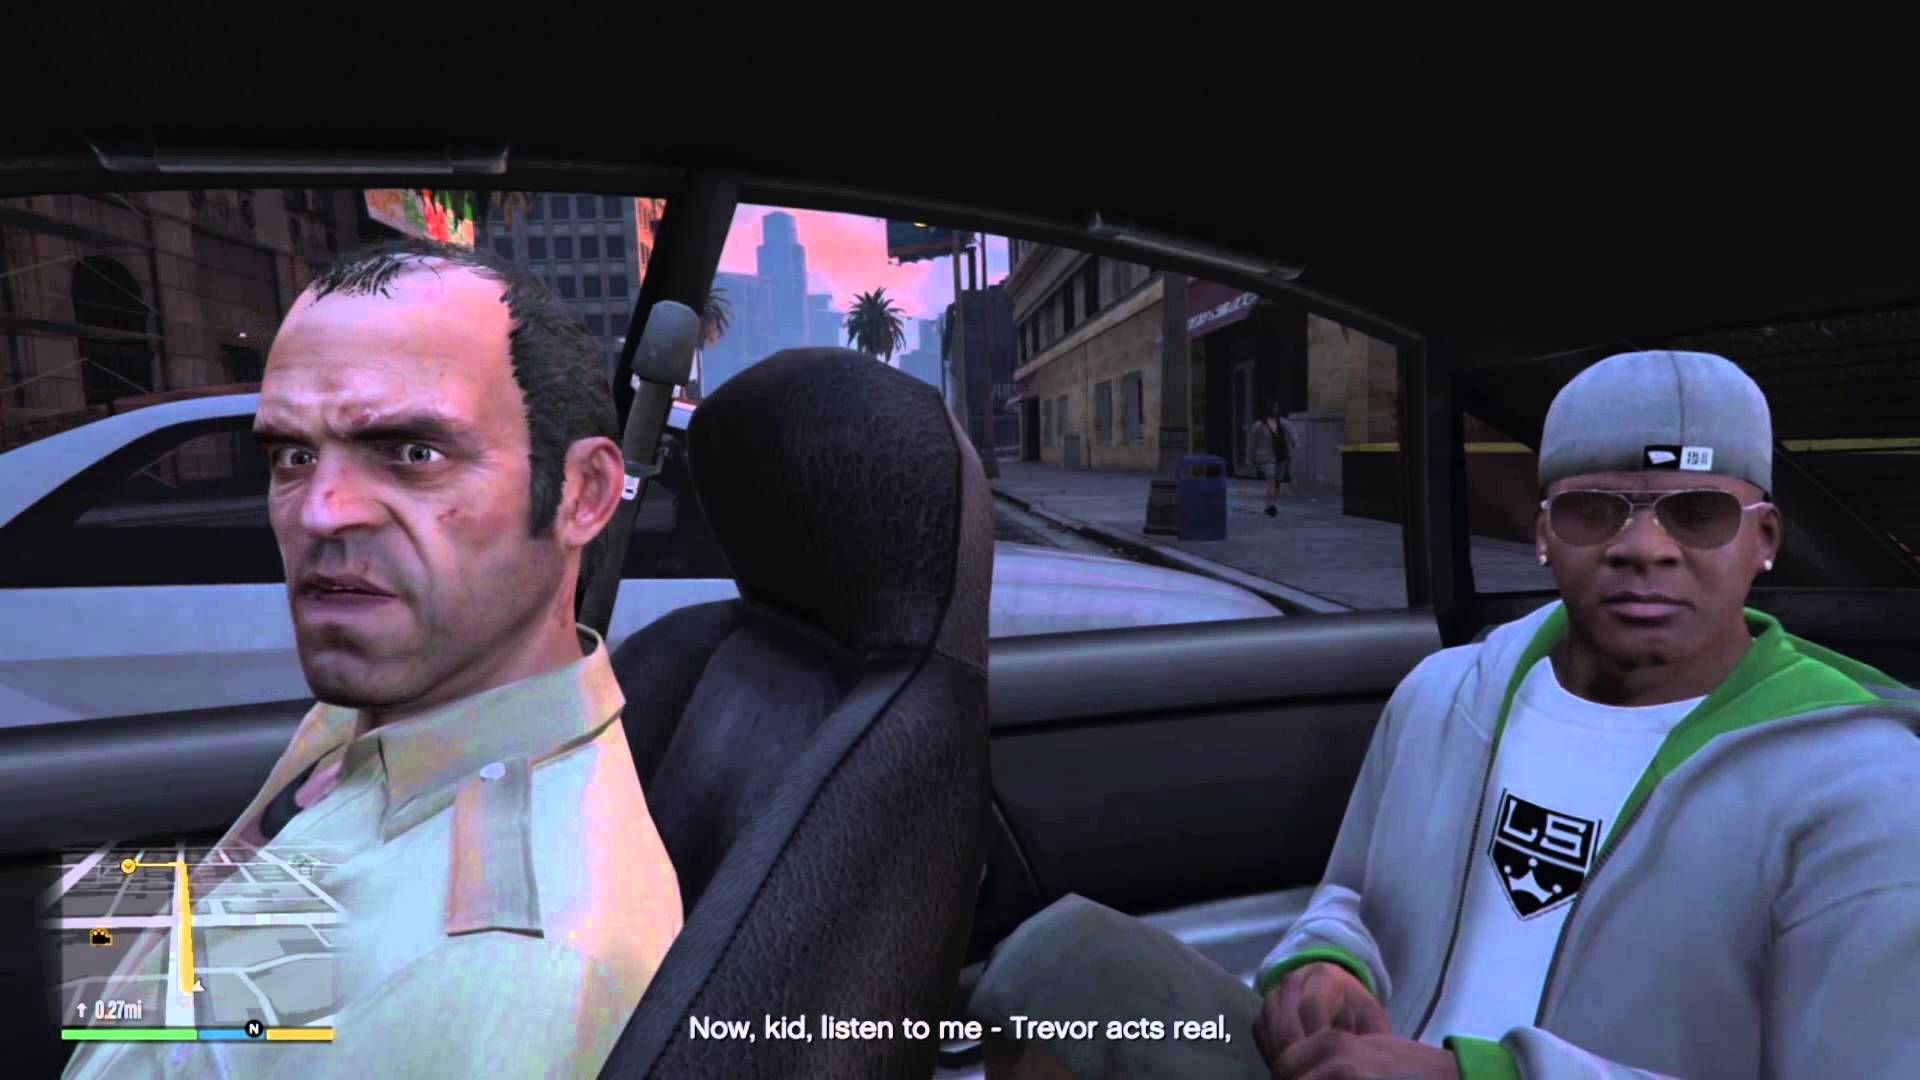 Grand Theft Auto 25 Things About Franklin That Make No Sense